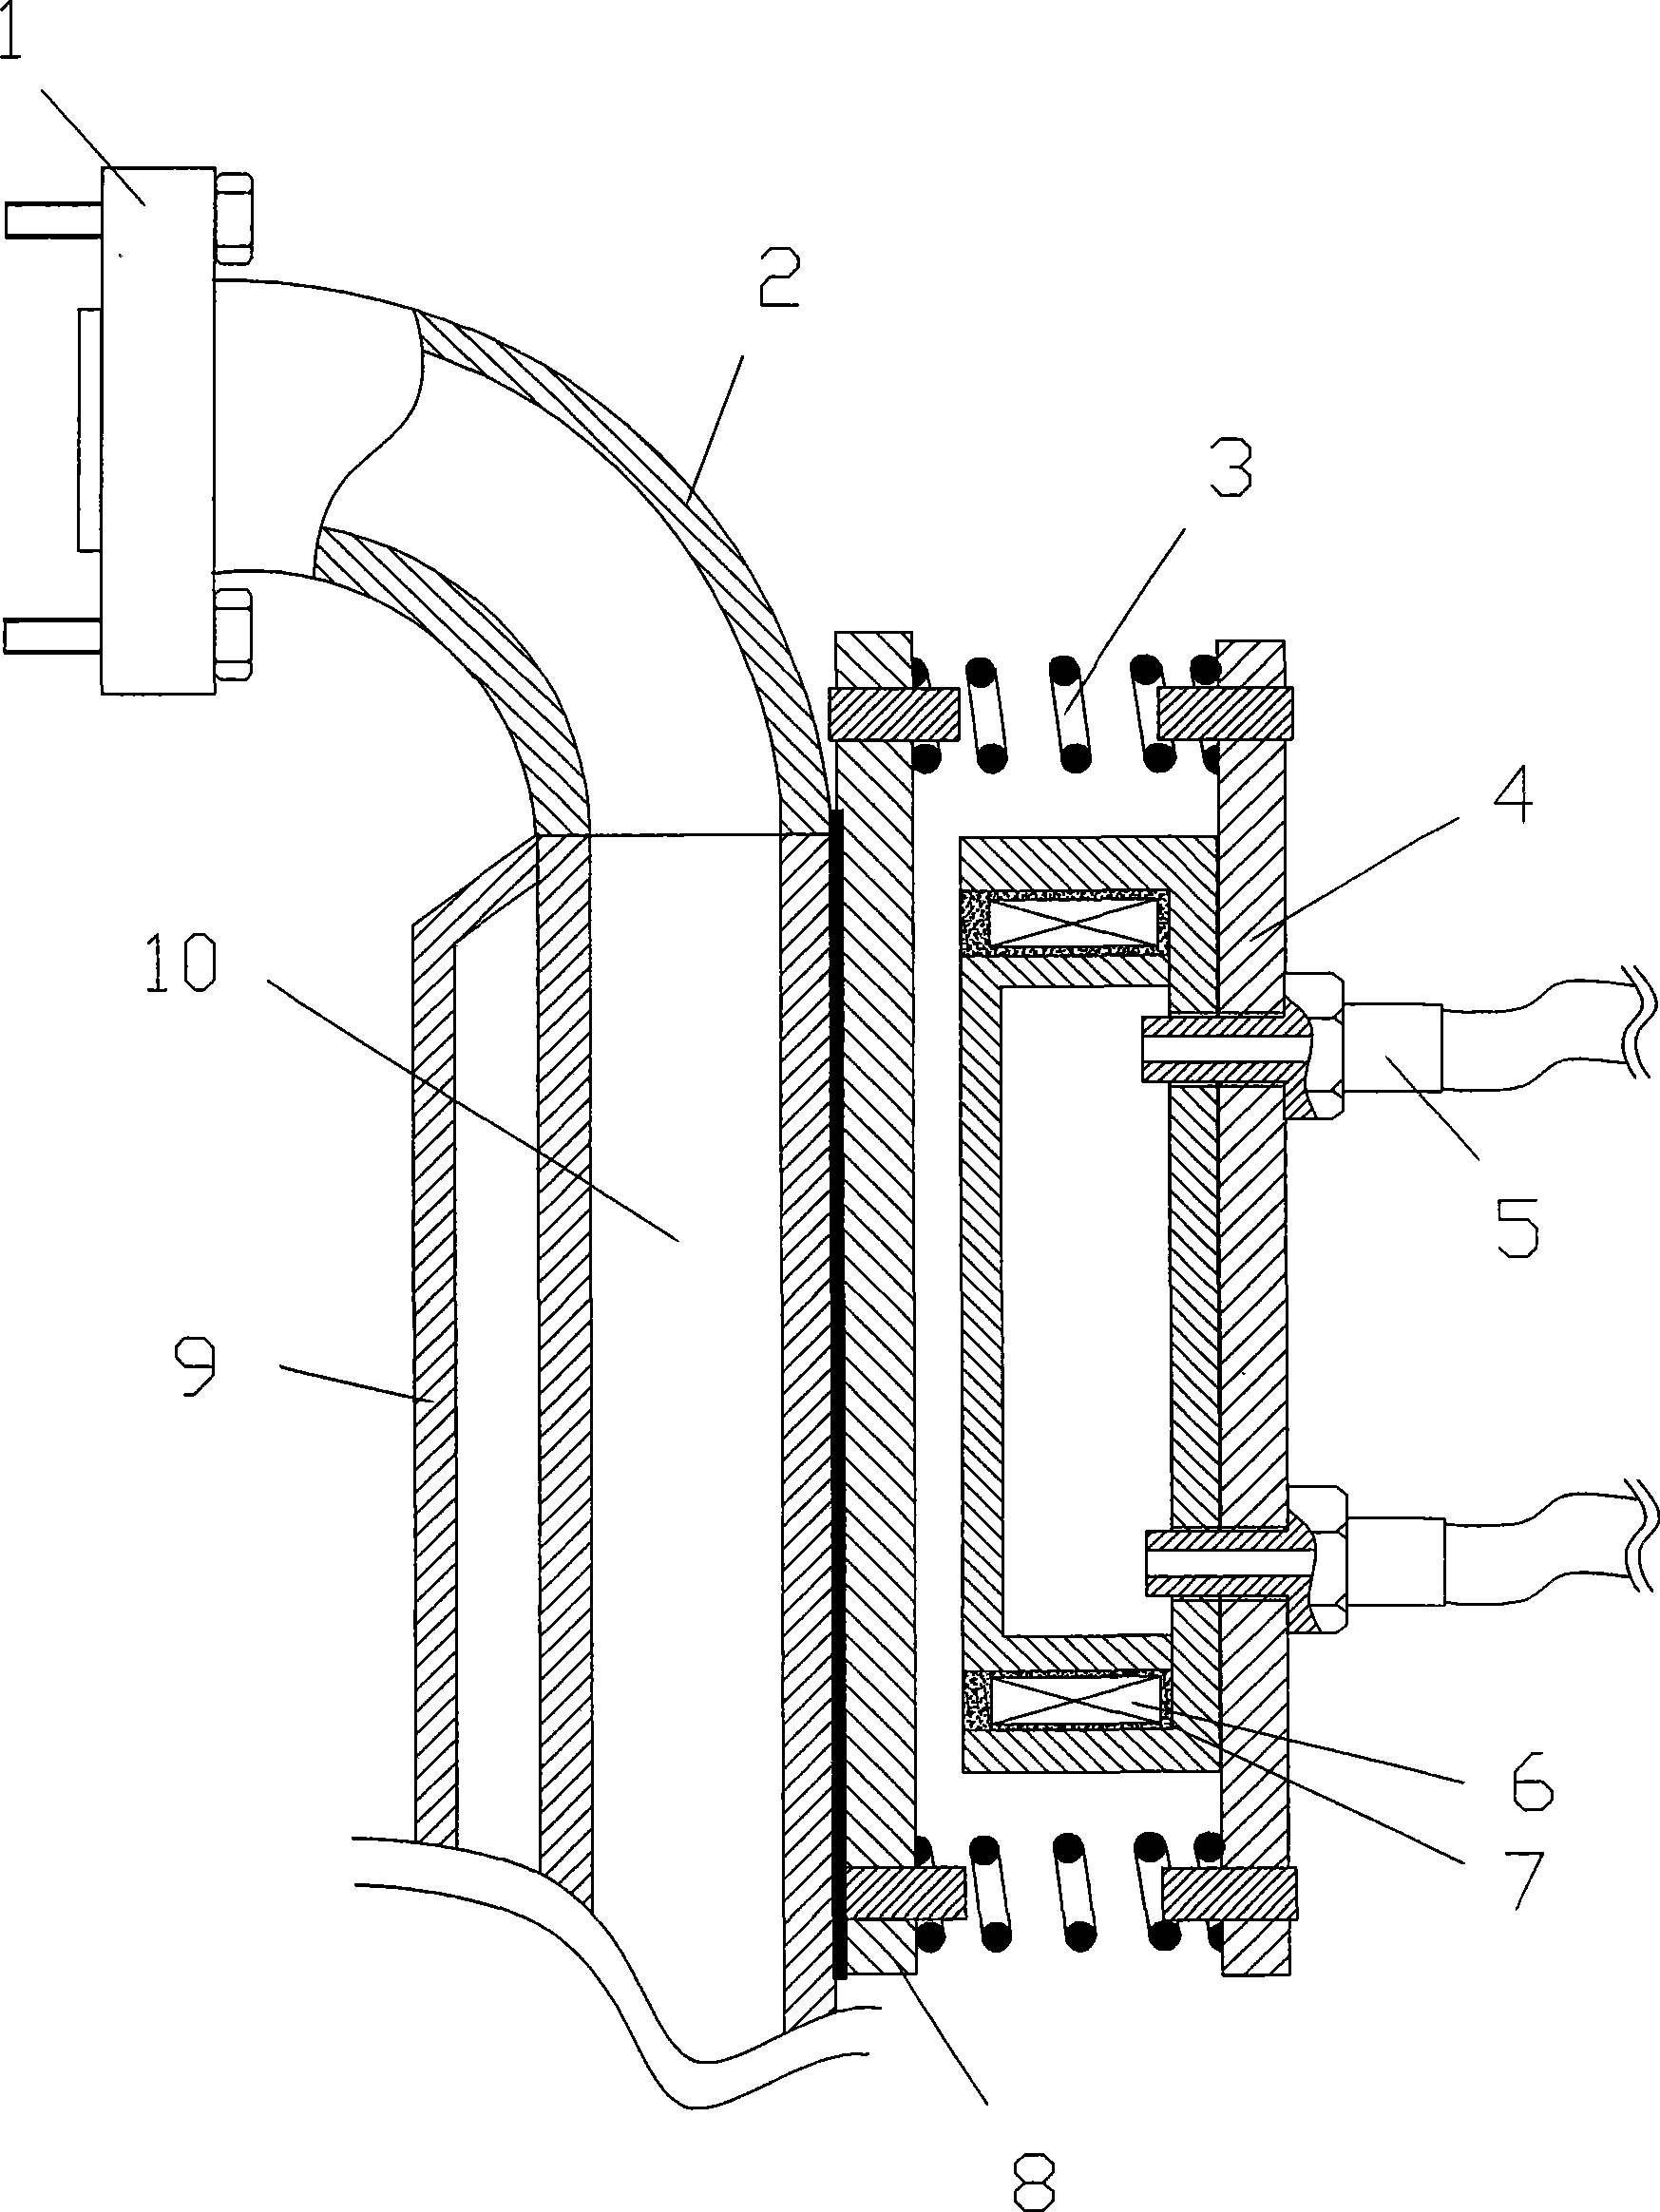 Heat recovery device of controllable vehicle exhaust